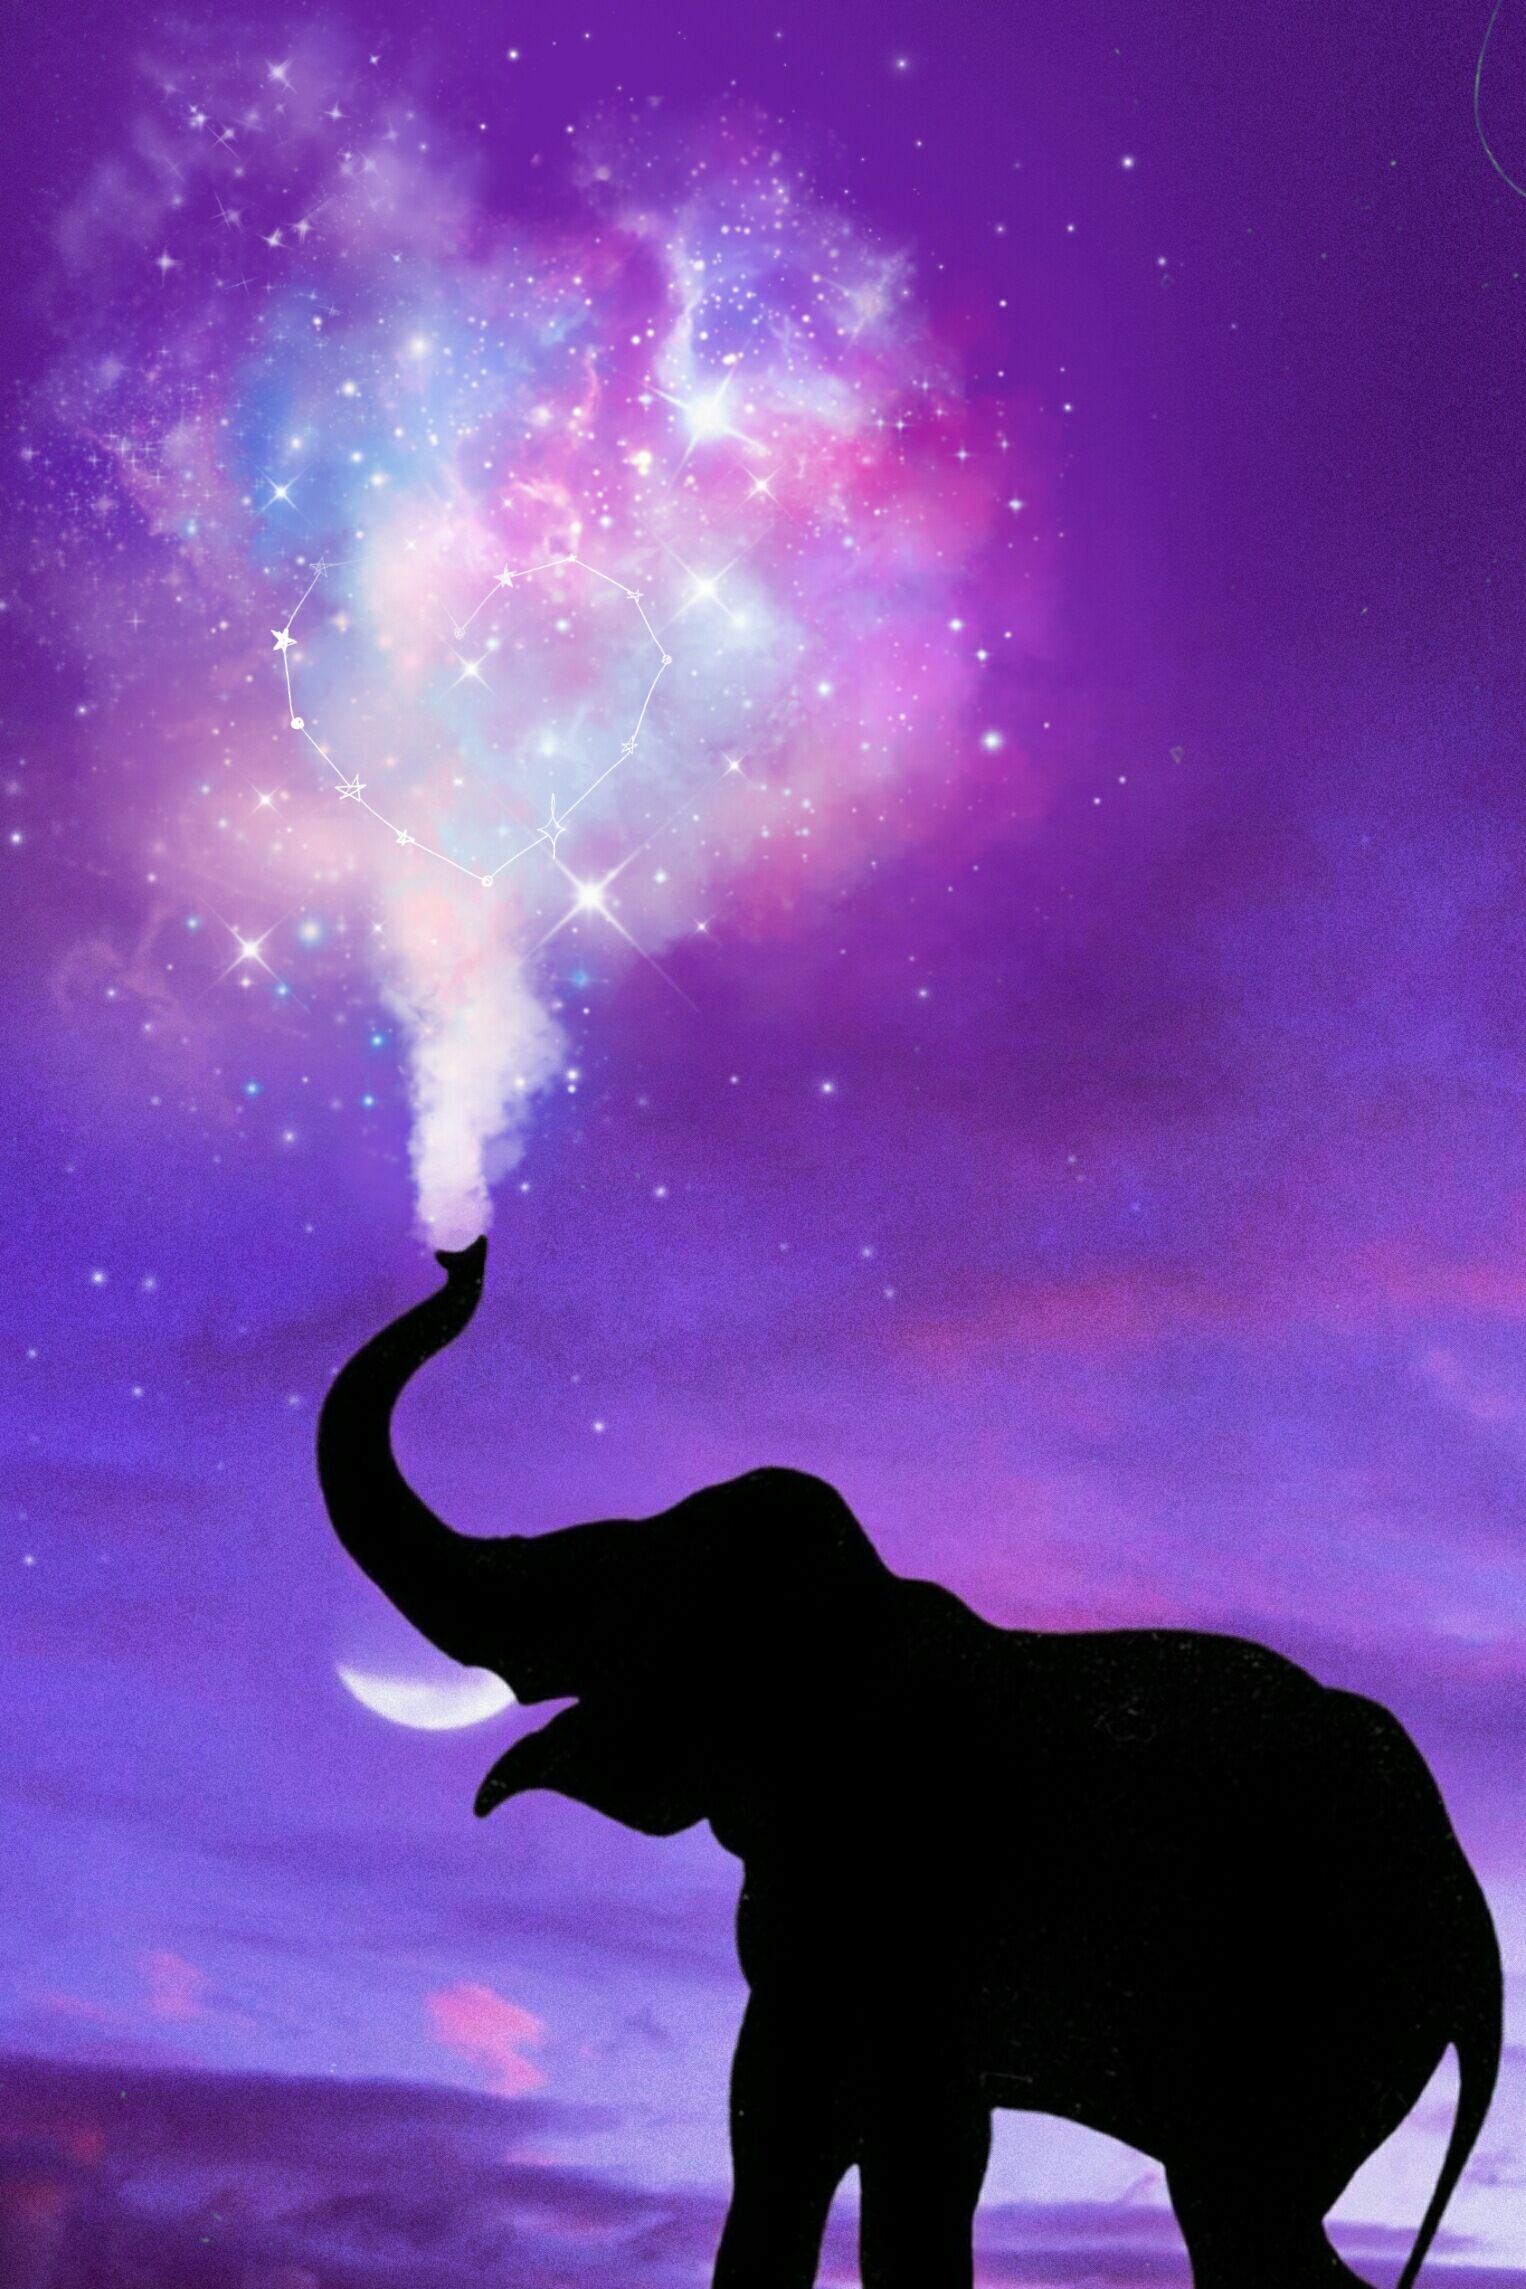 An elephant standing in front of a purple sky - Elephant